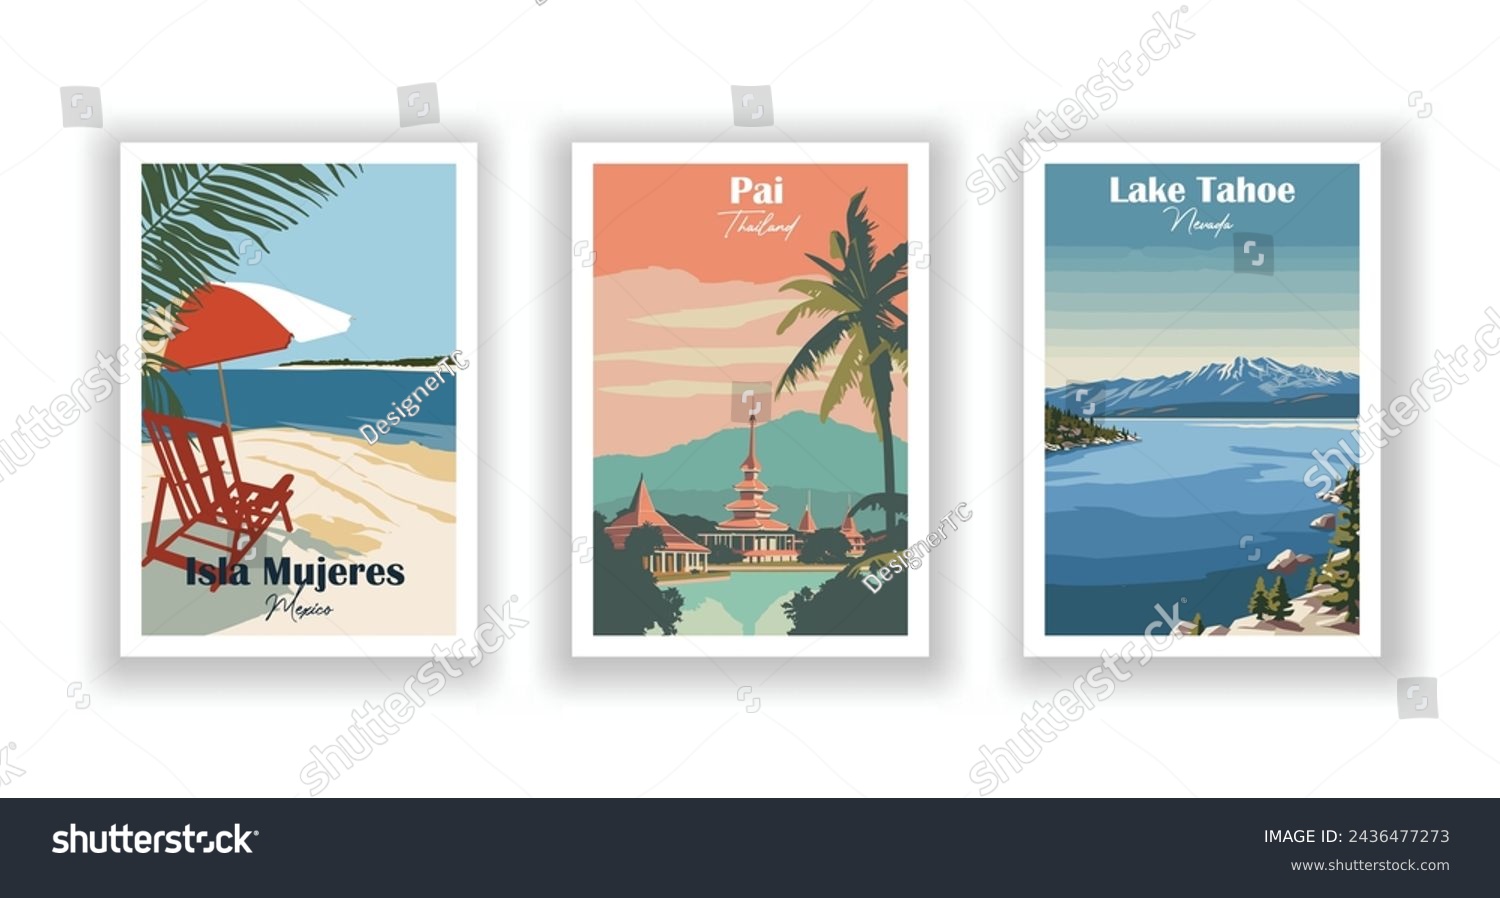 SVG of Isla Mujeres, Mexico. Lake Tahoe, Nevada. Pai, Thailand - Set Vintage Travel Poster. Vector illustration. High quality prints svg